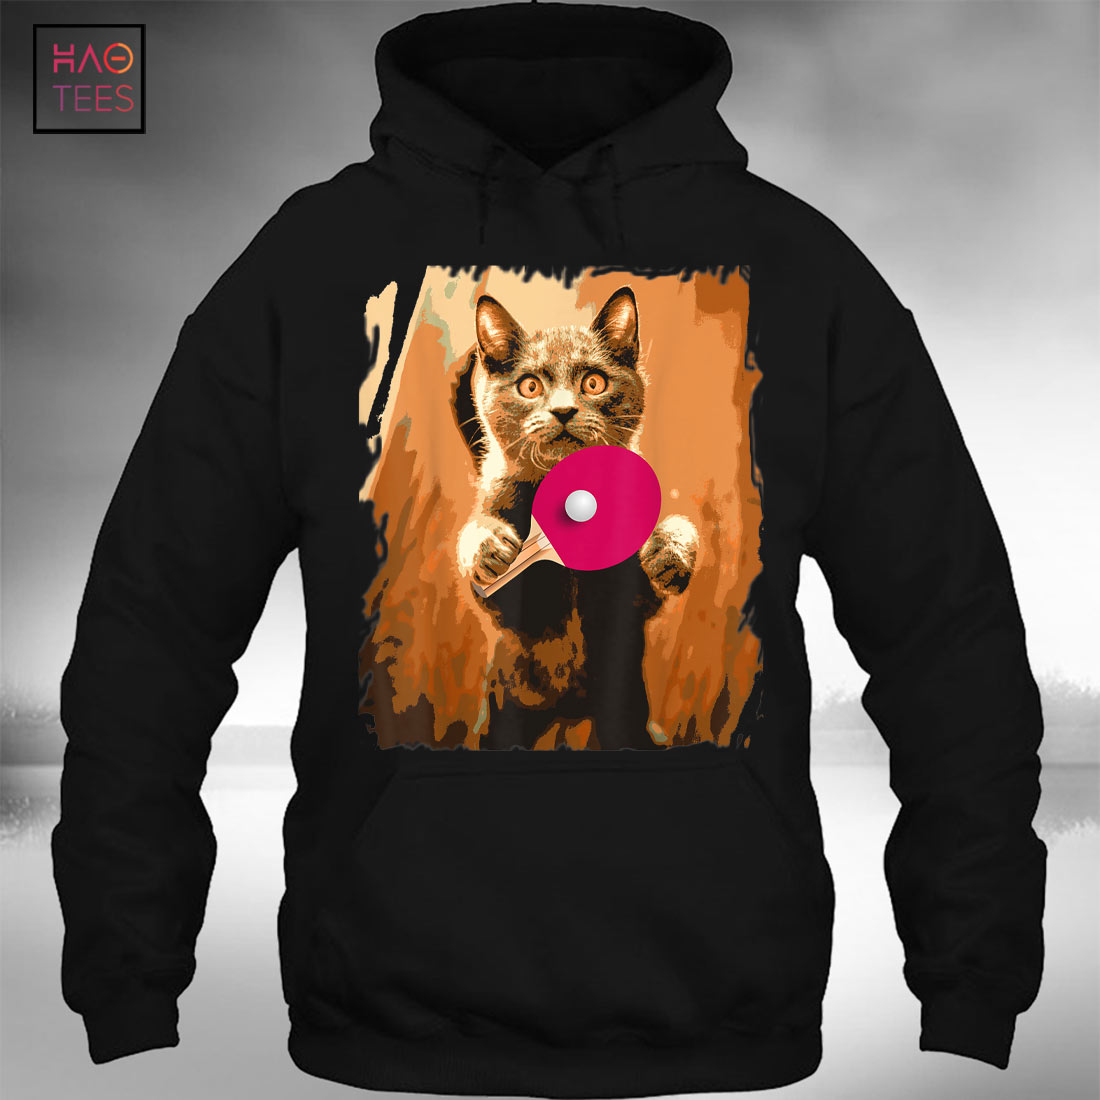 The ping pong cat has a pink racket T-Shirt